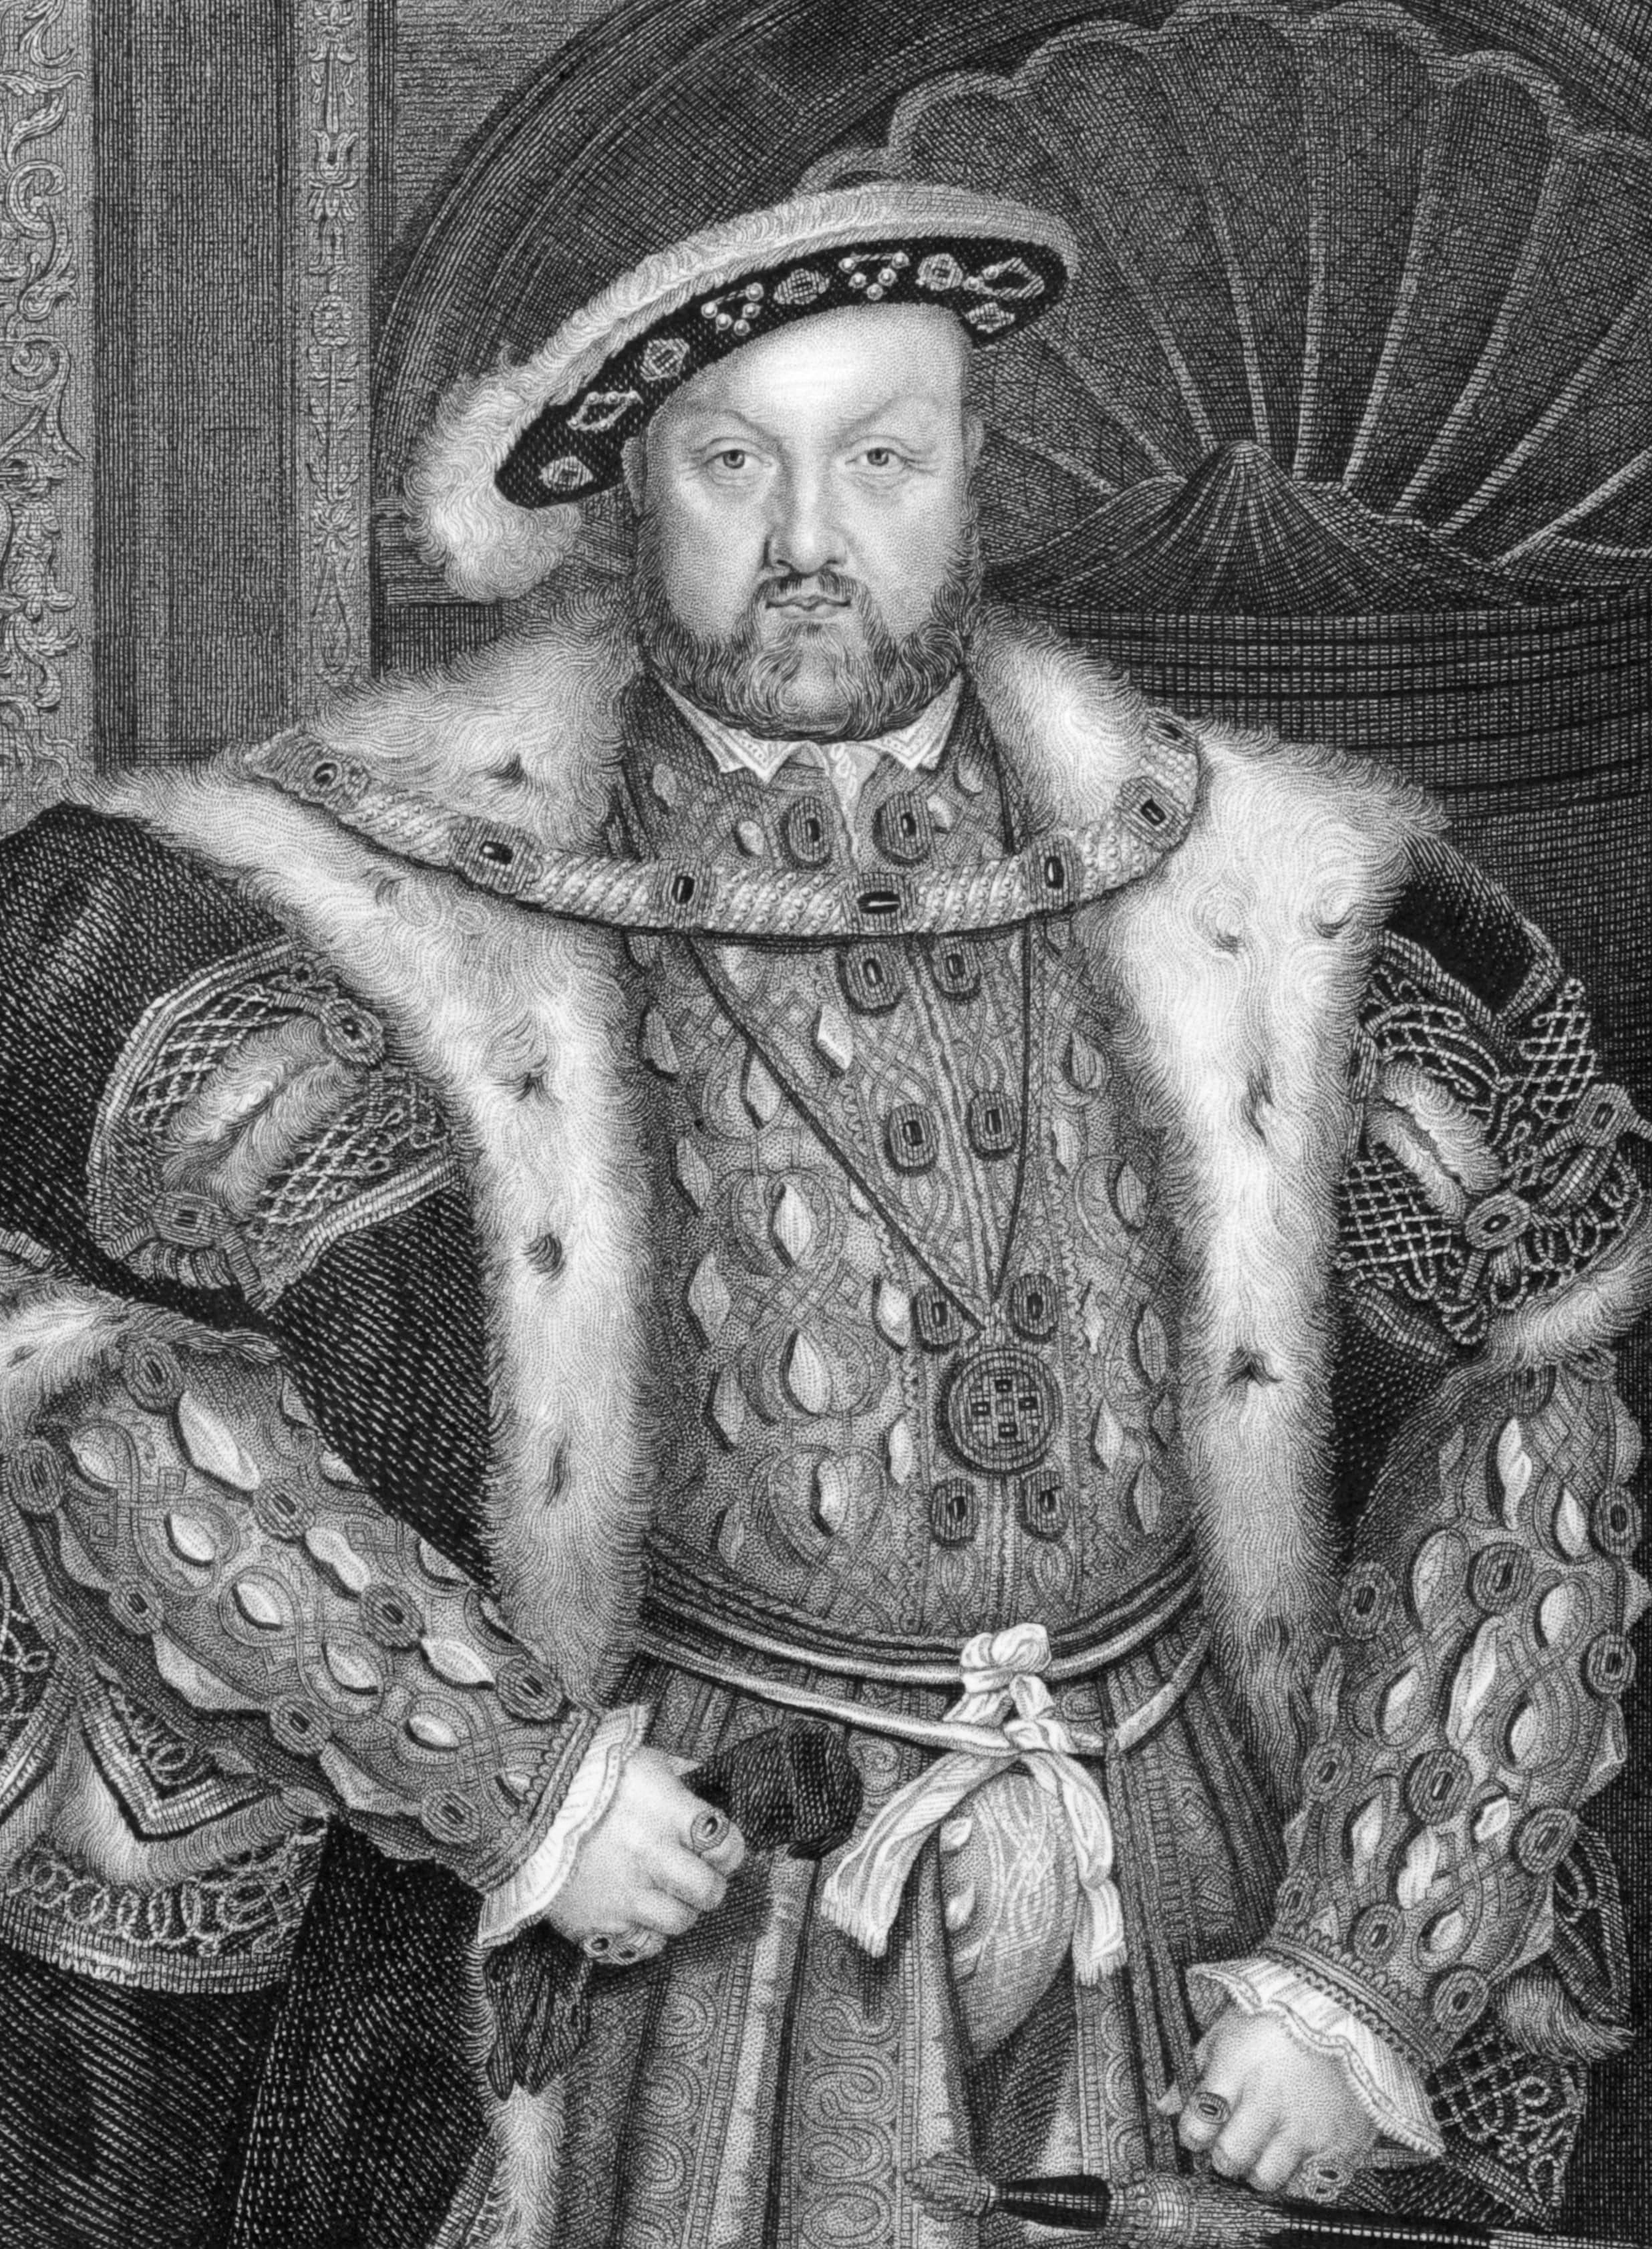 A sketched image of King Henry VIII in his royal finery